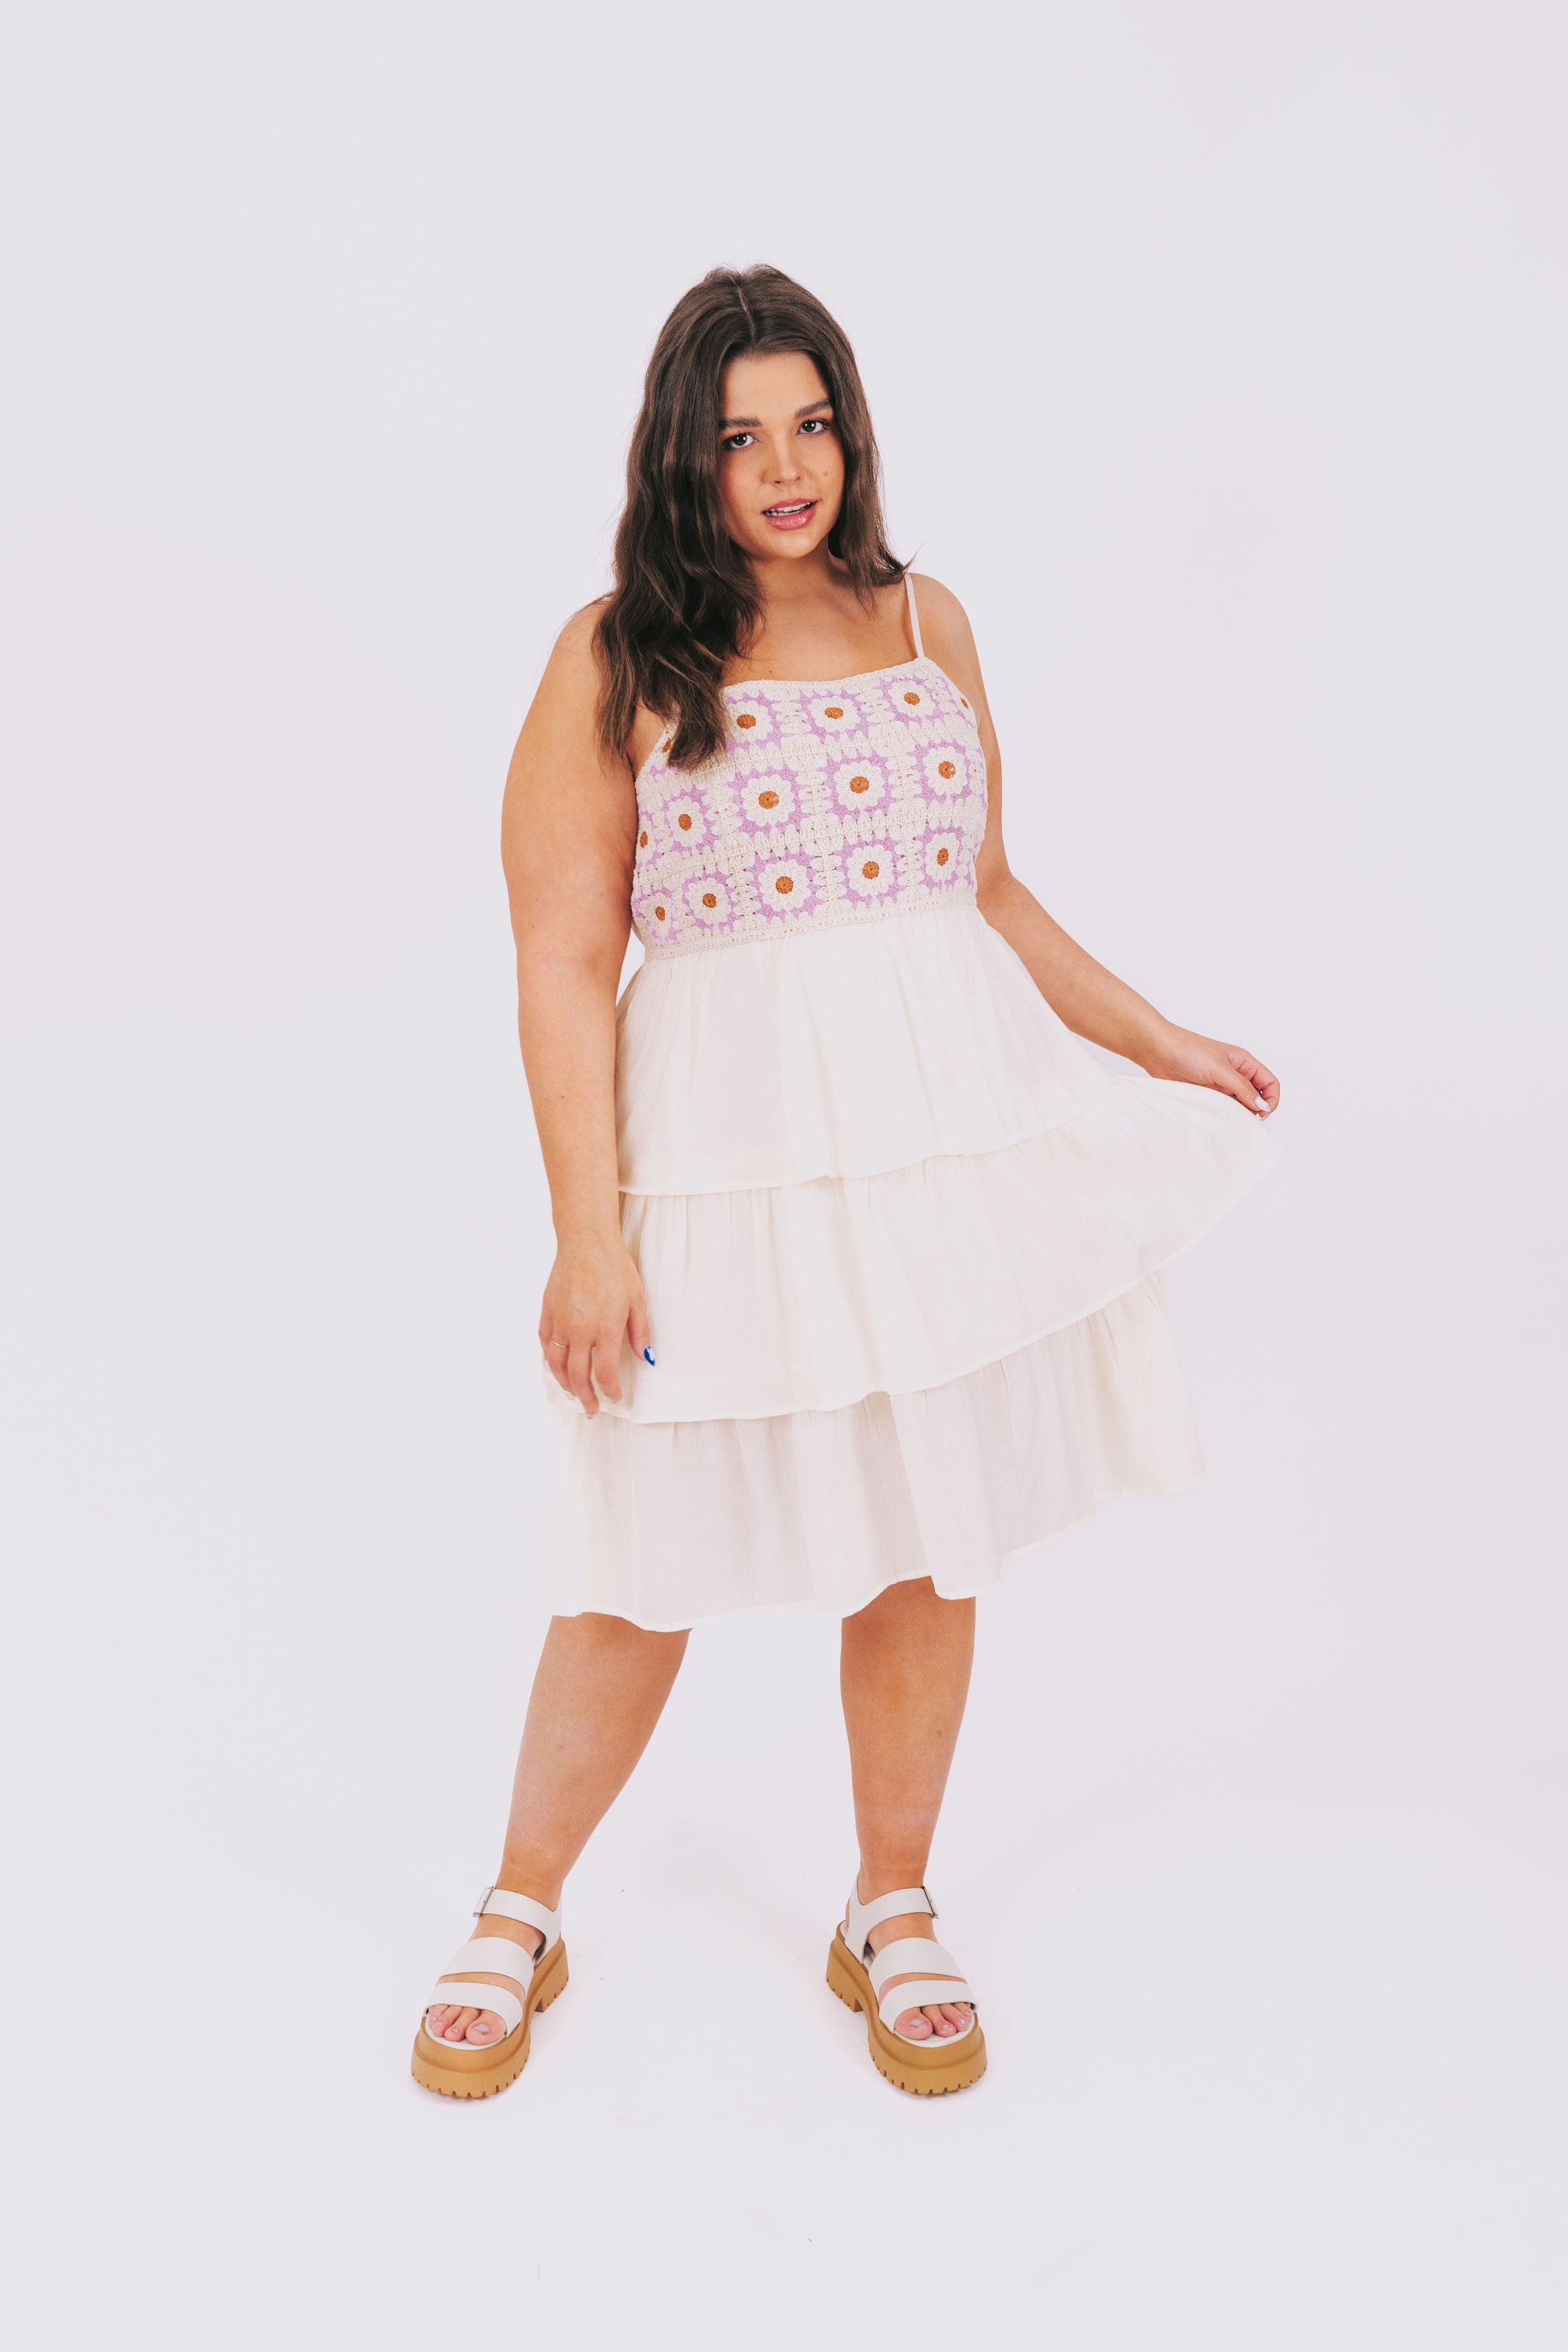 PLUS SIZE - Make A Difference Dress